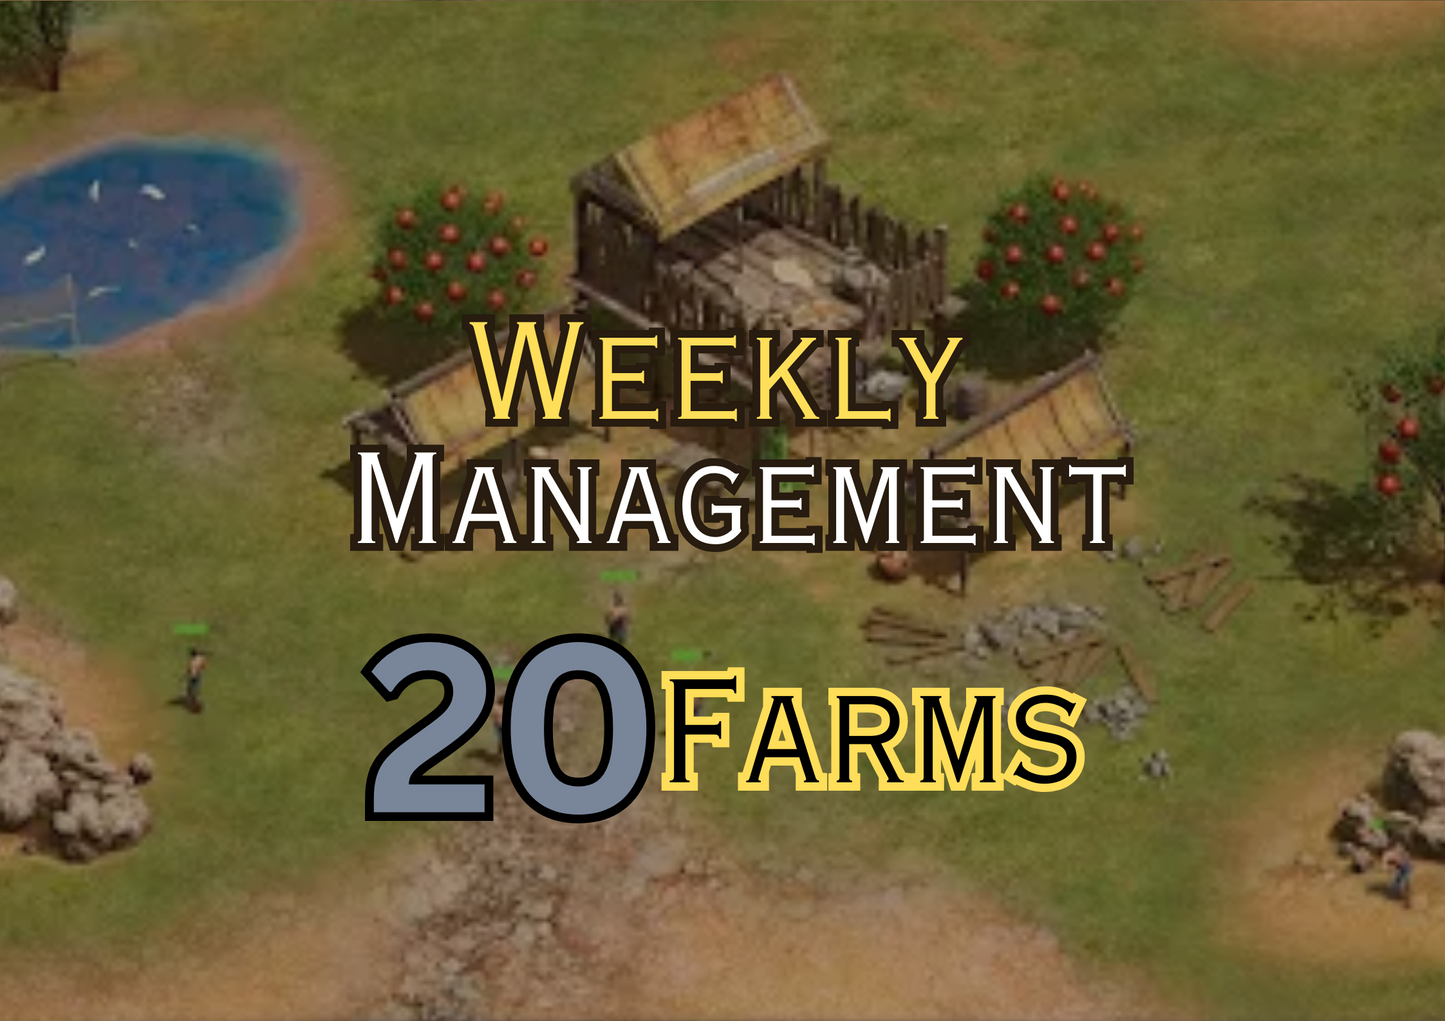 Weekly Management for 20 farms